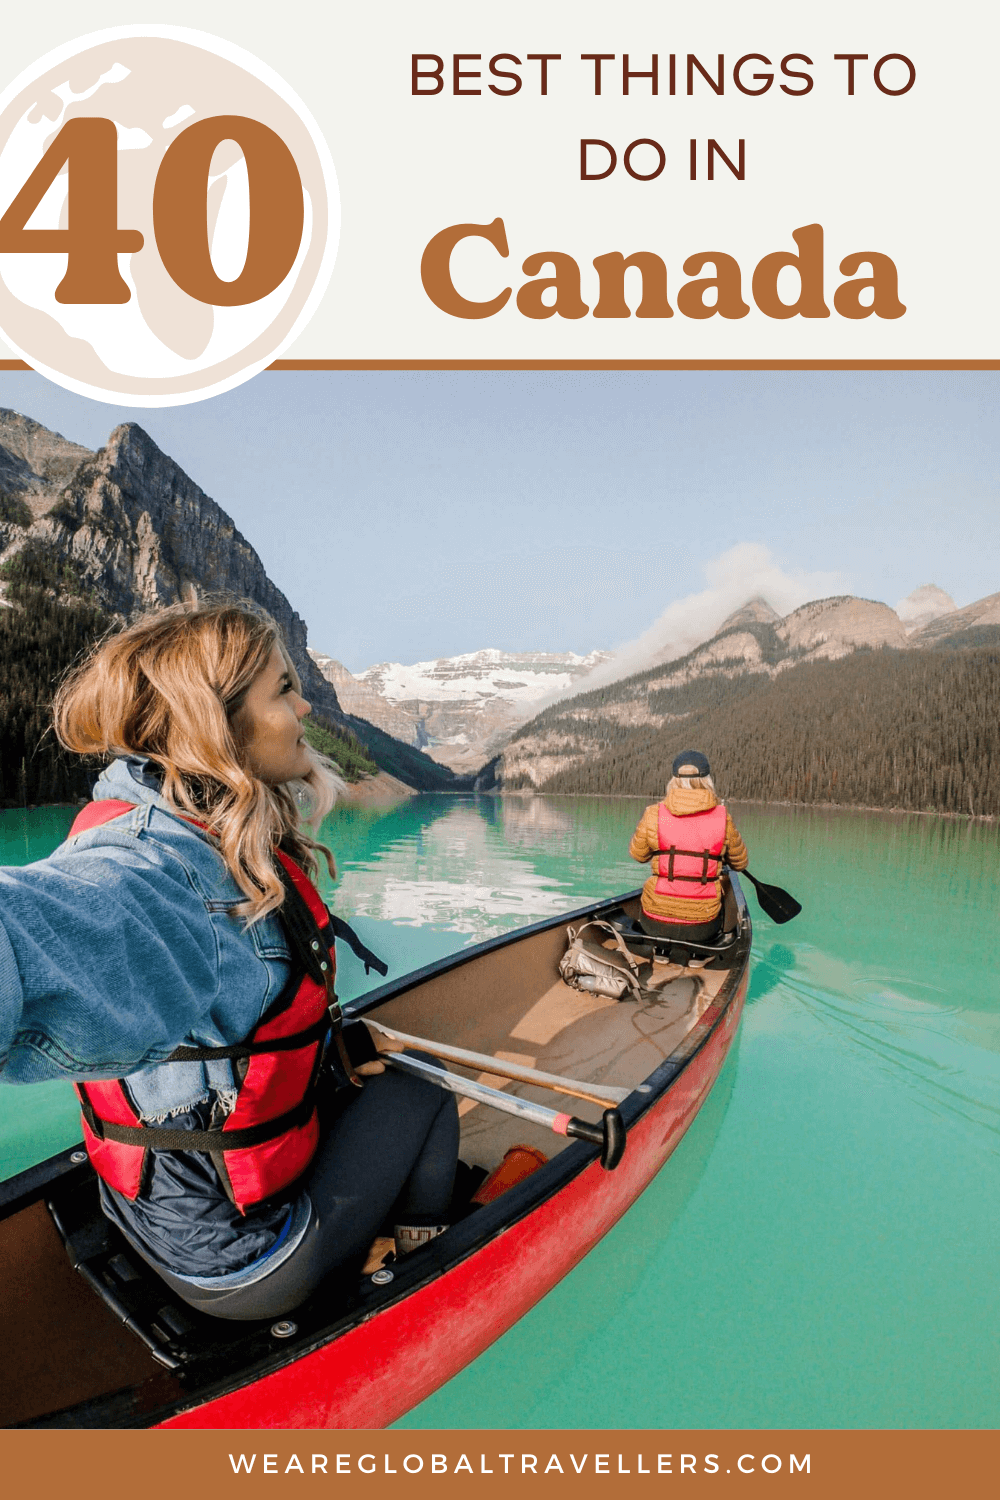 The best things to do in Canada